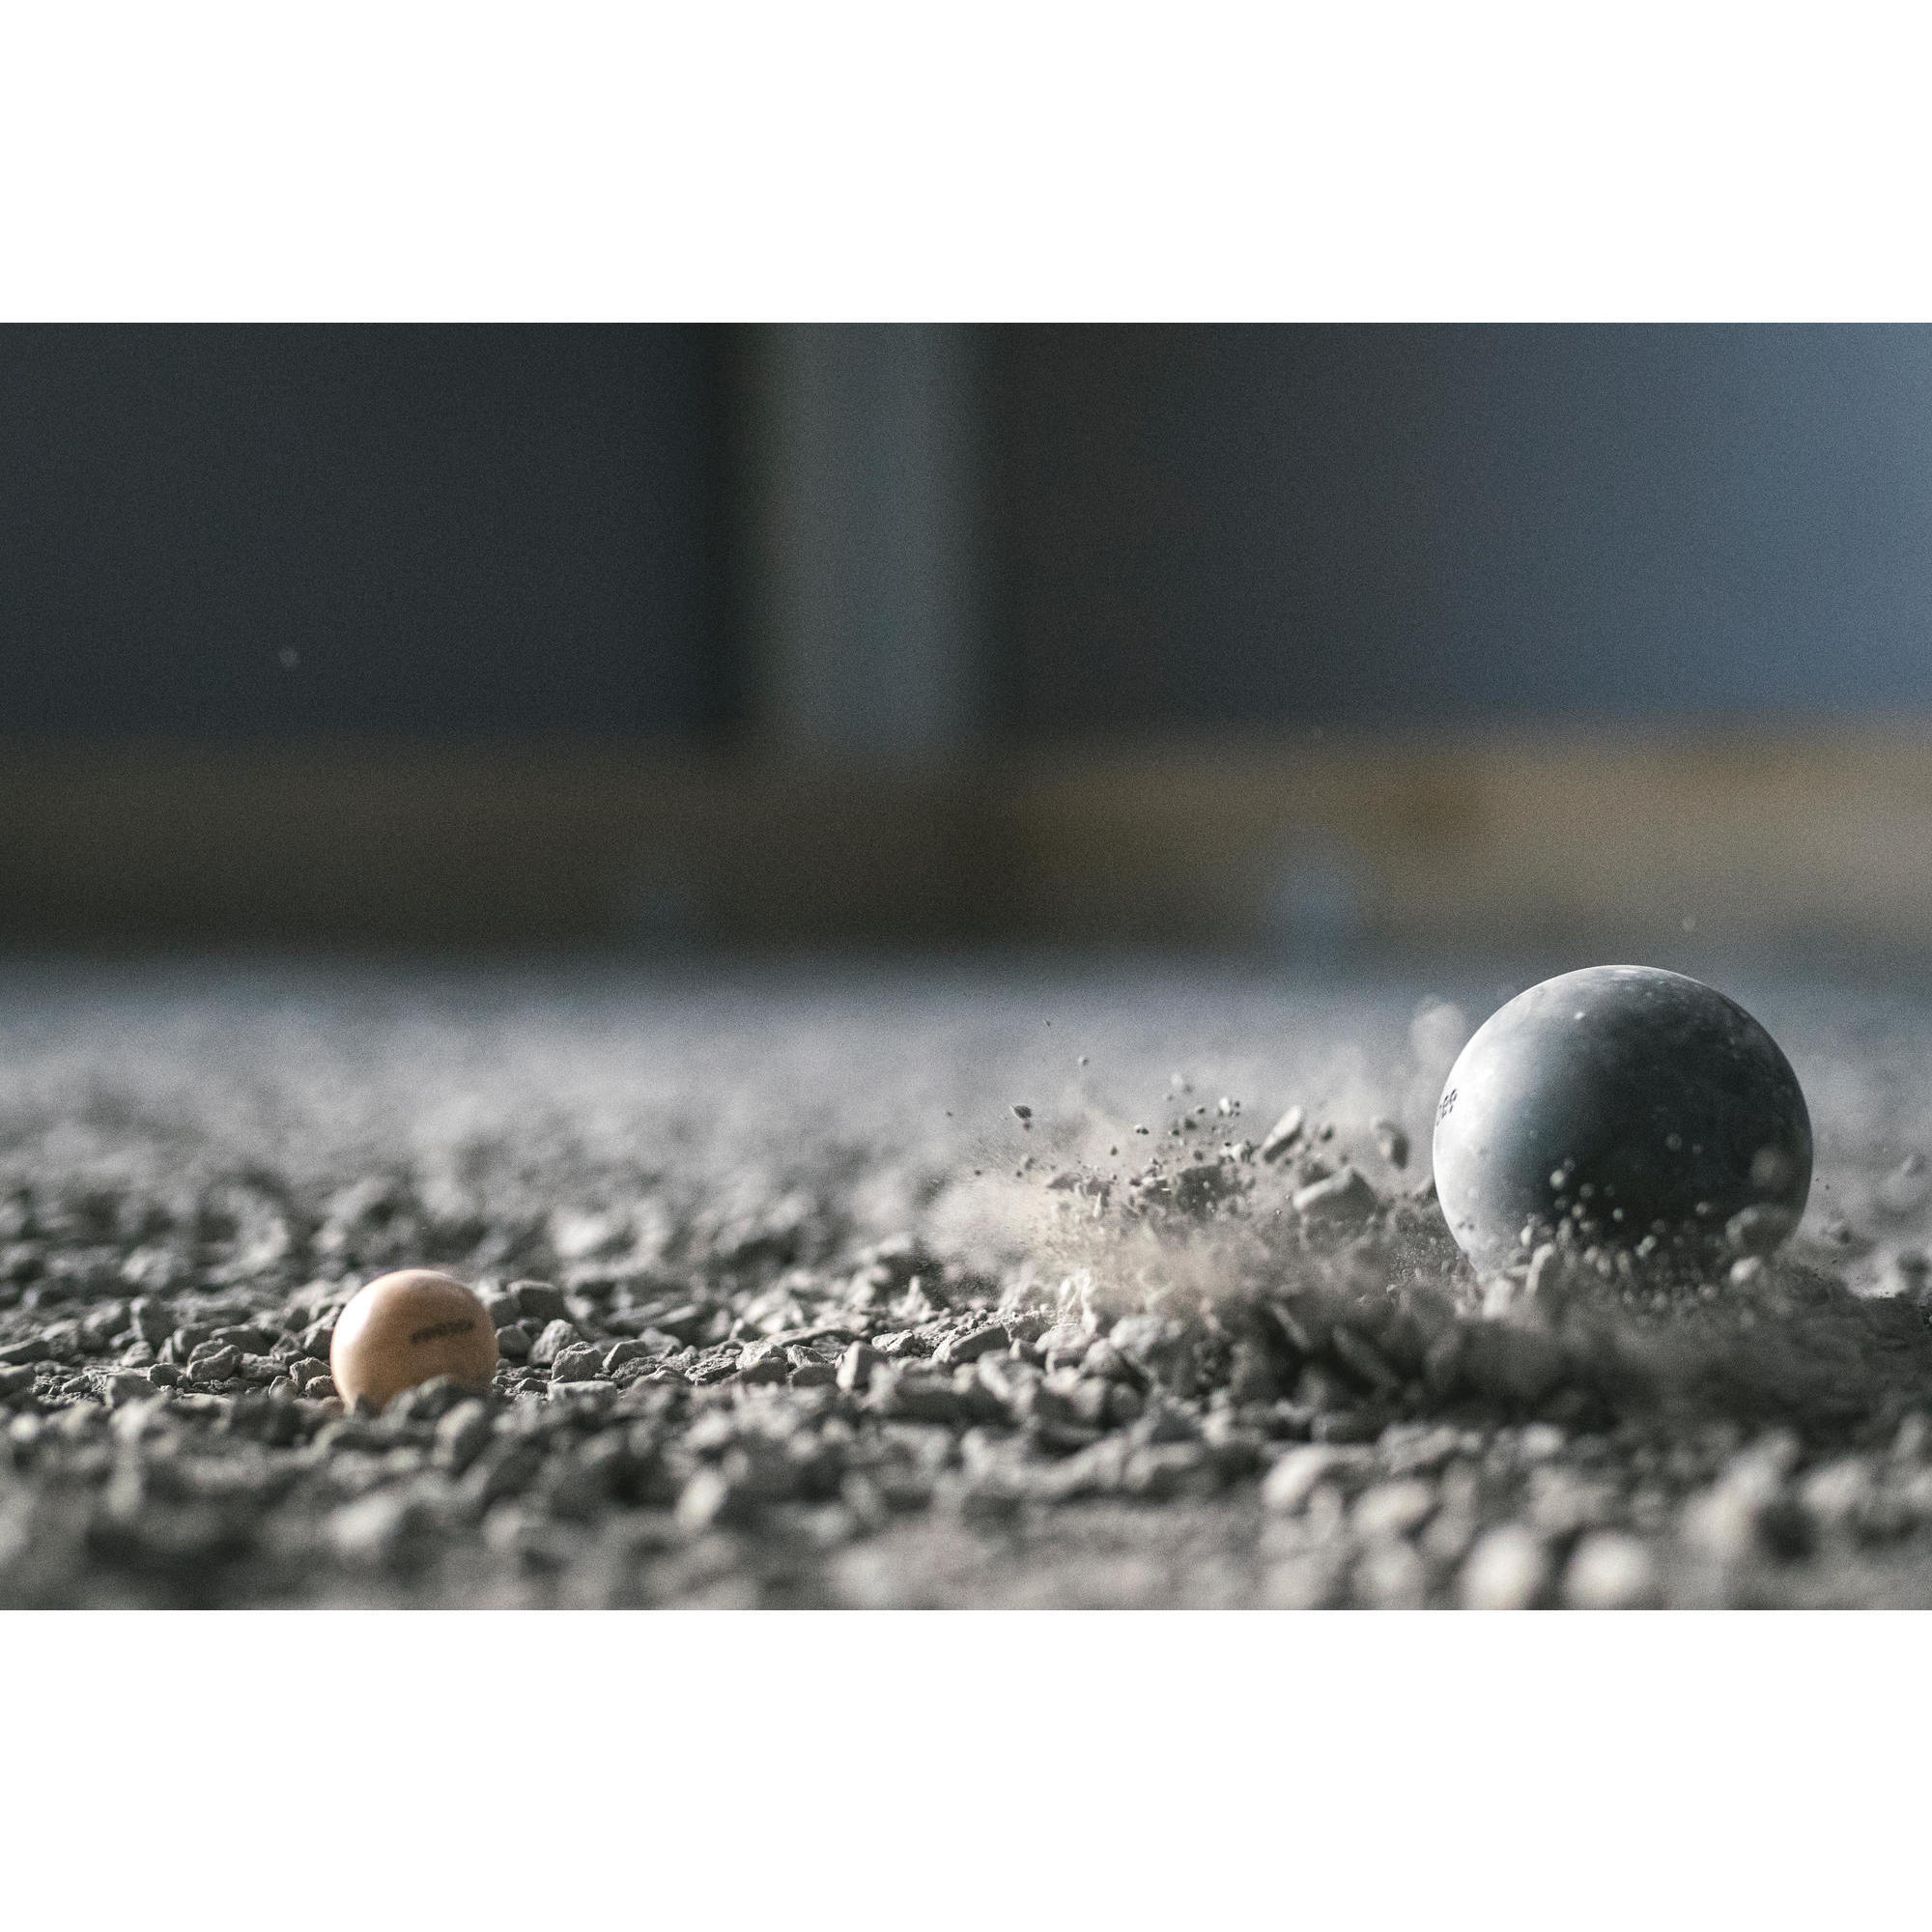 Refurbished 3 Soft Competition Petanque Boules - B Grade 7/7